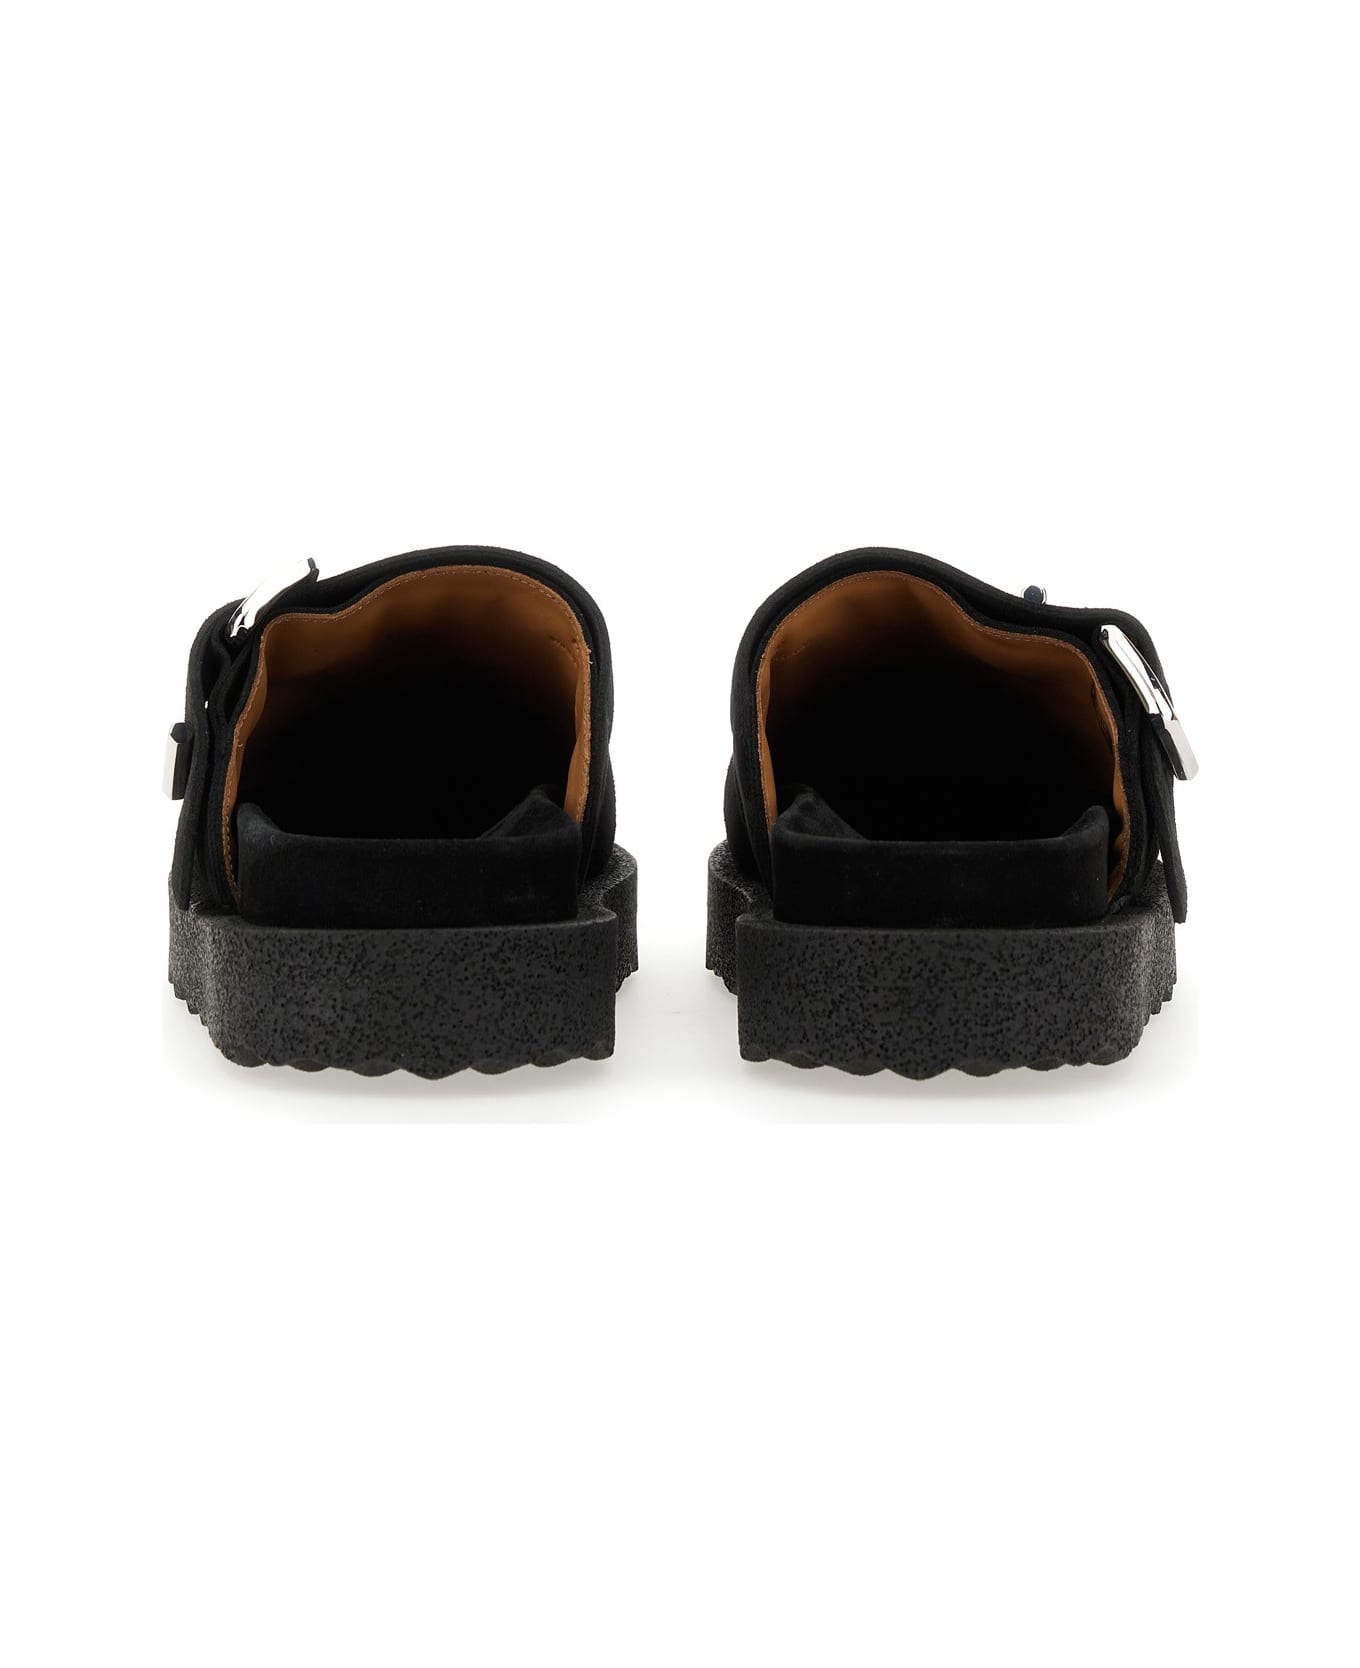 Off-White Suede Sandals With Buckle - NERO